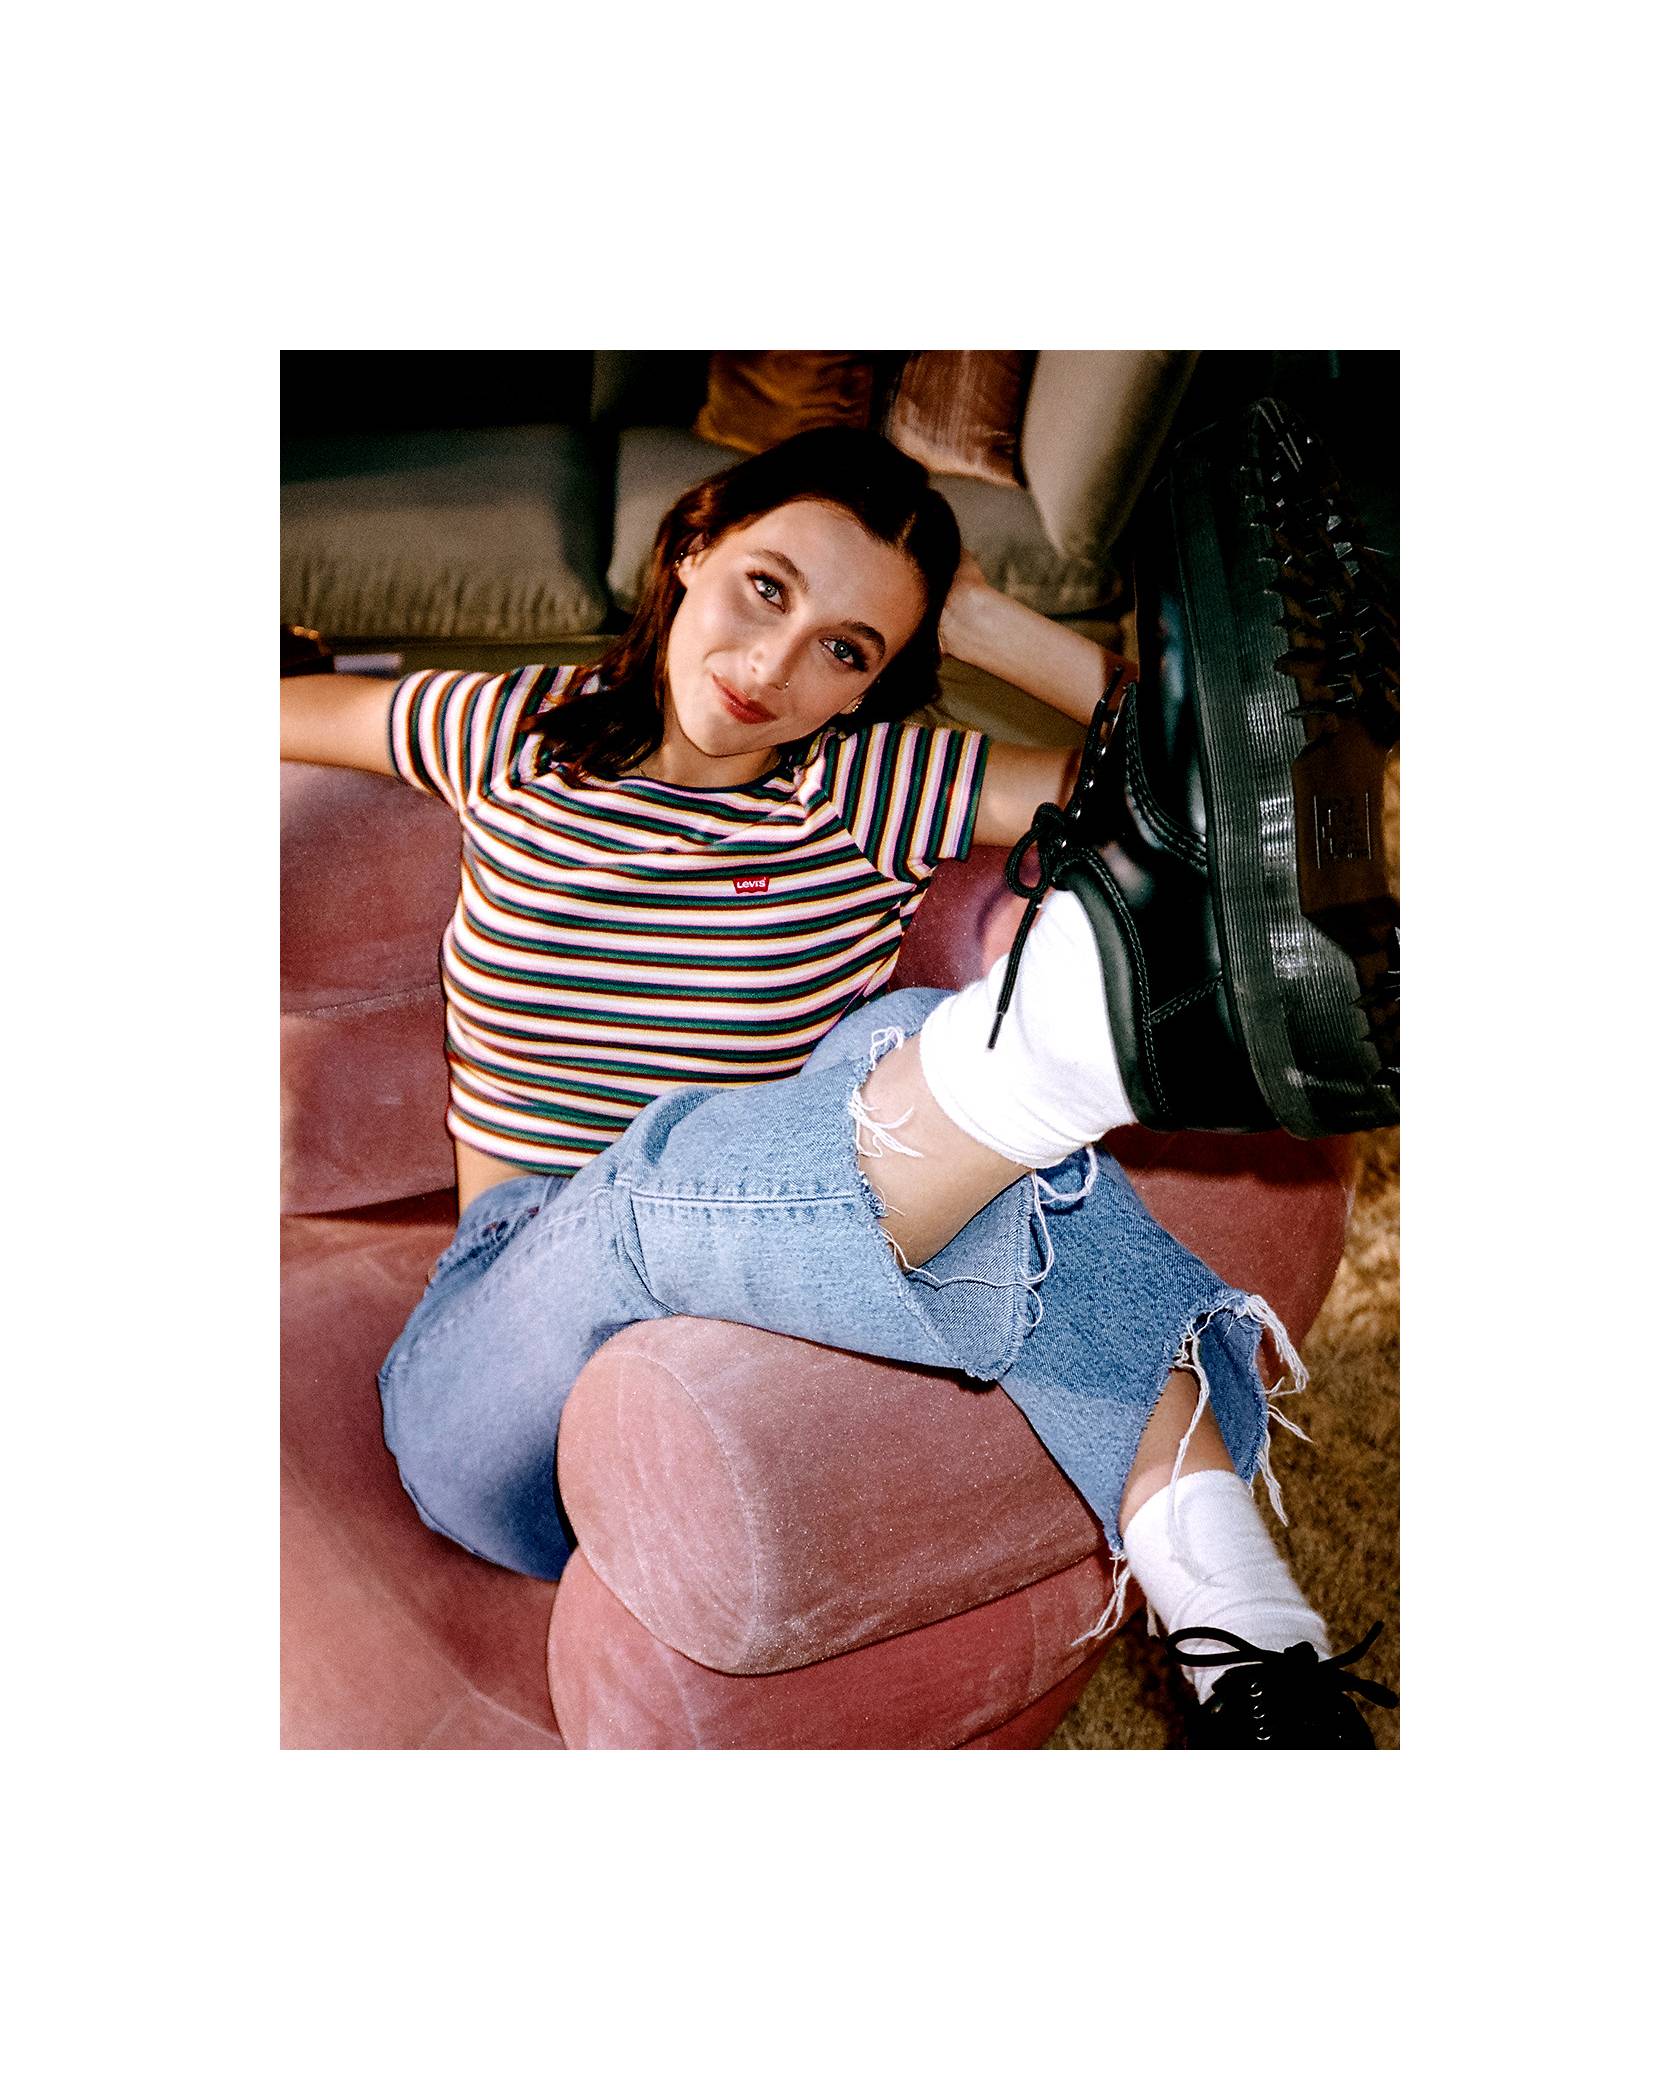 A photo of Emma sitting in a chair wearing a vintage Levi's striped shirt and Levi's jeans